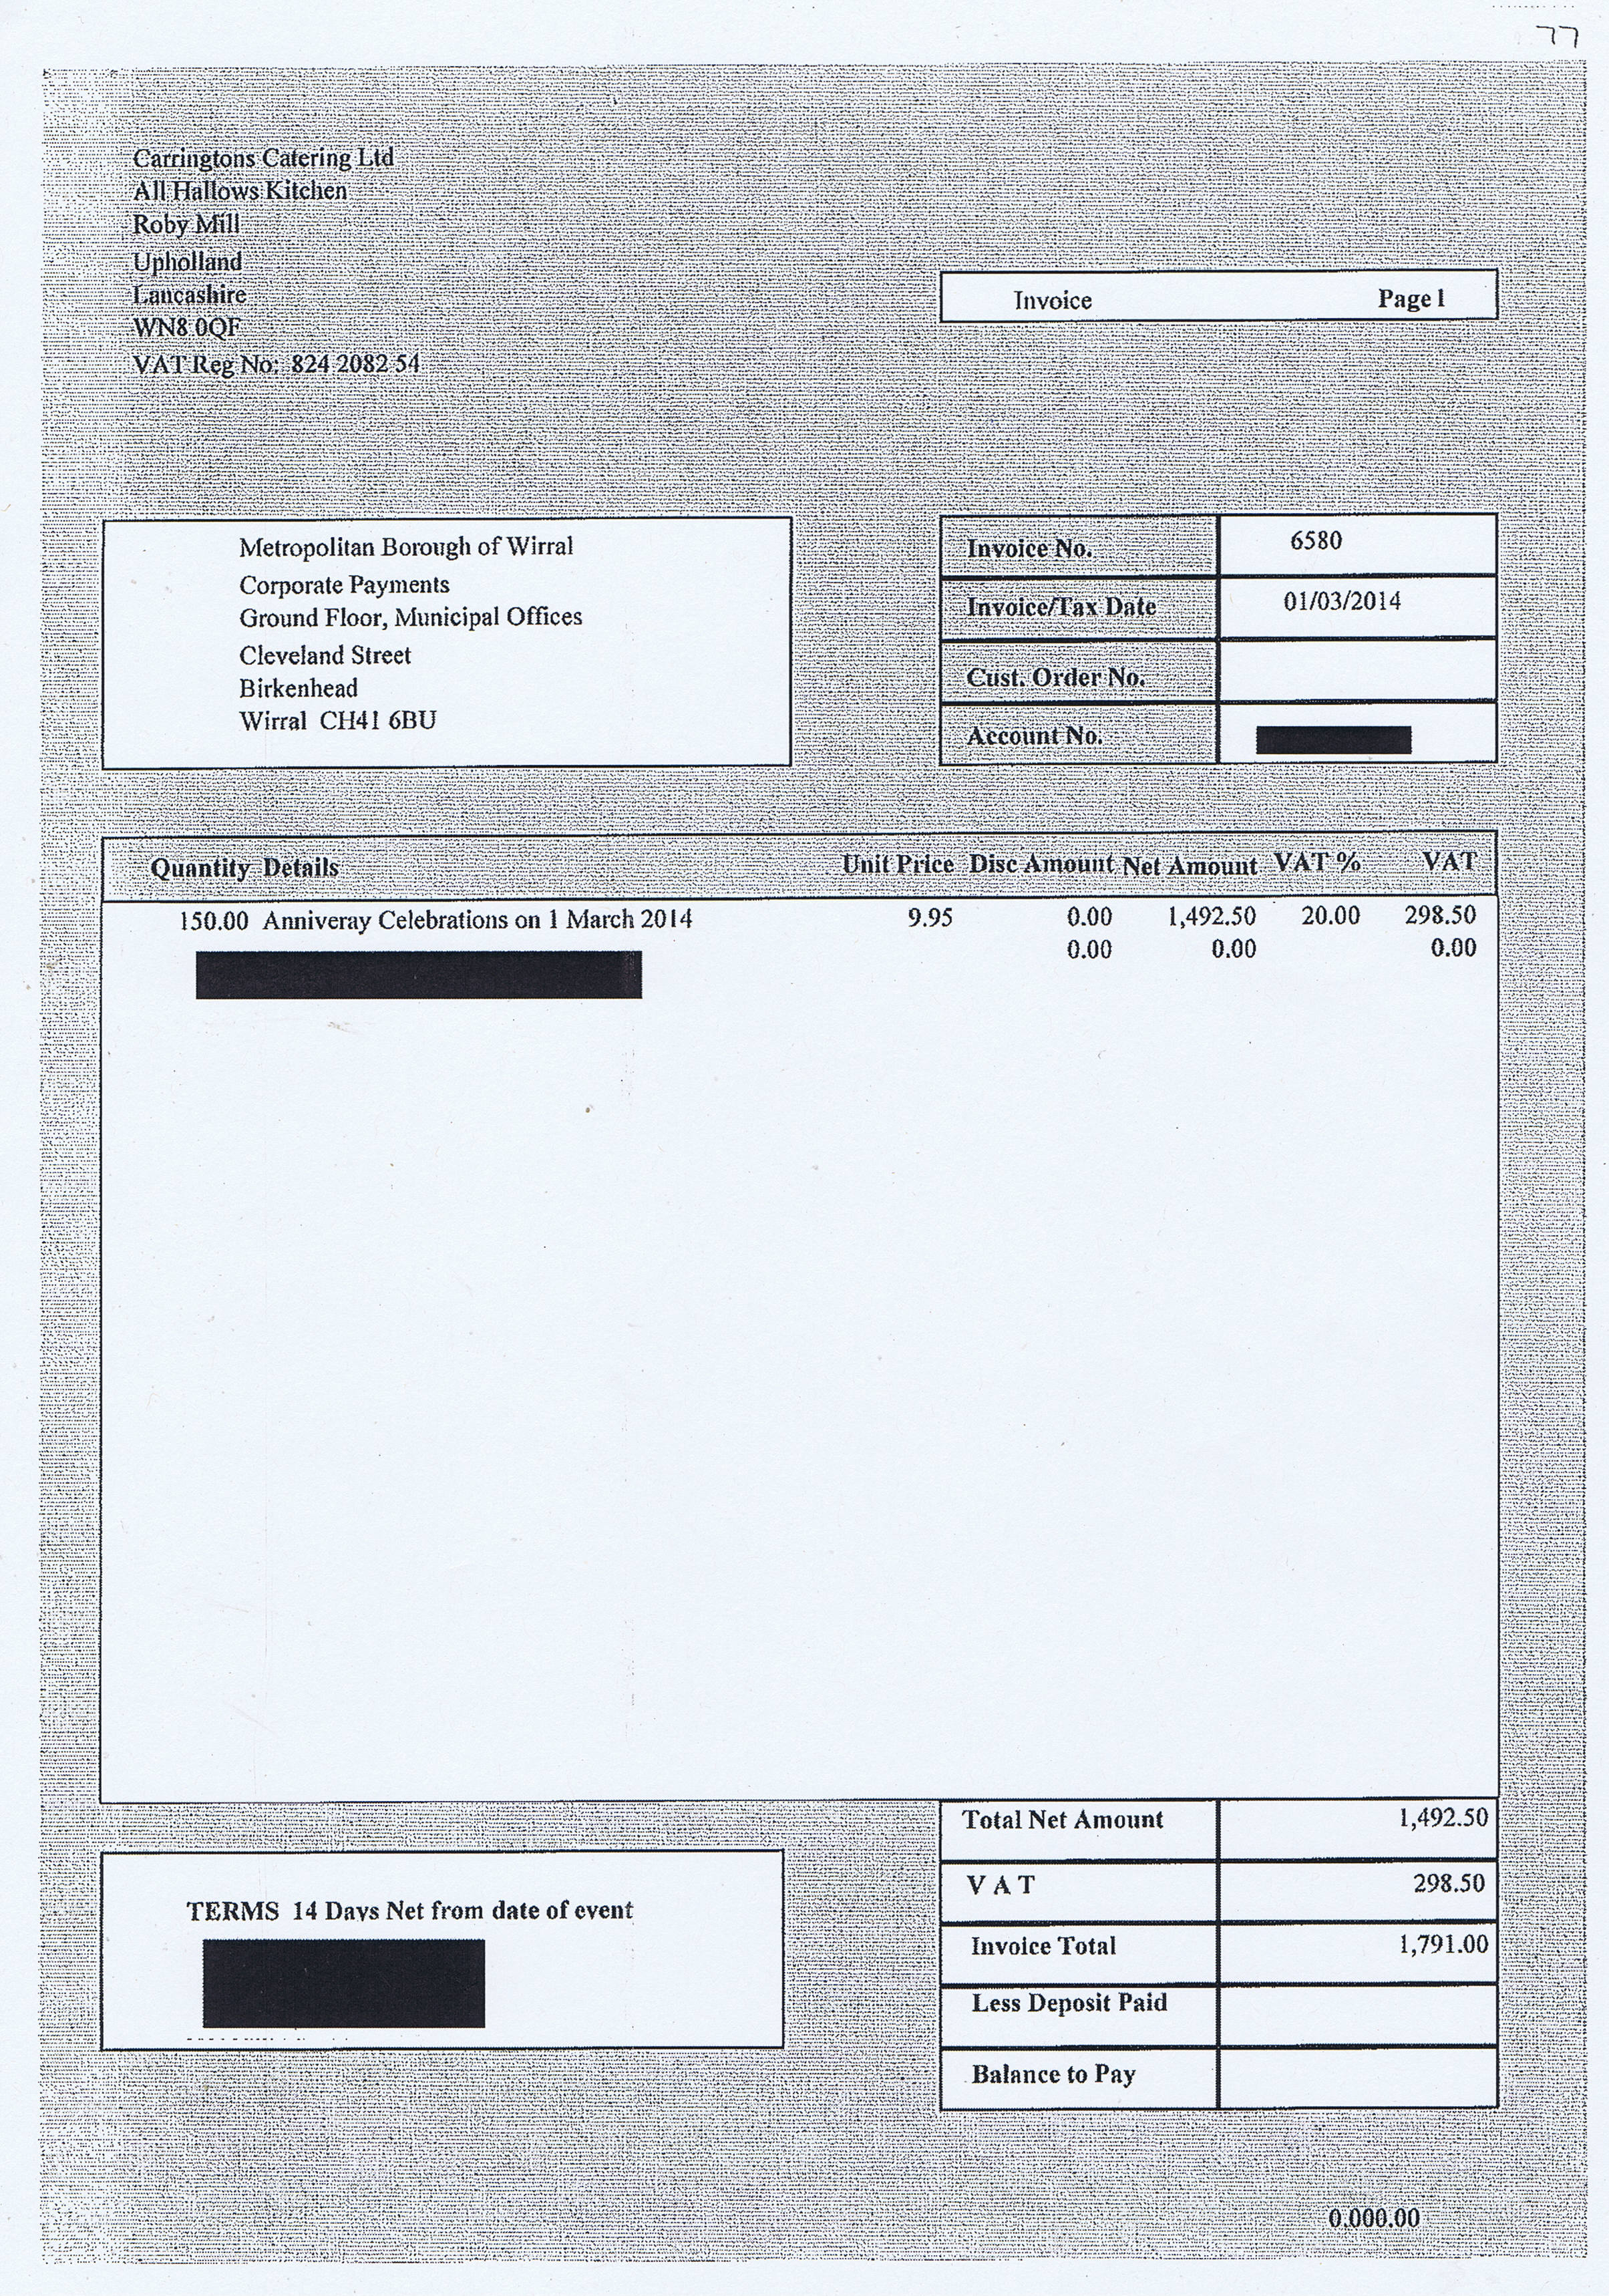 Wirral Council invoice 77 Carringtons Catering Ltd £1791